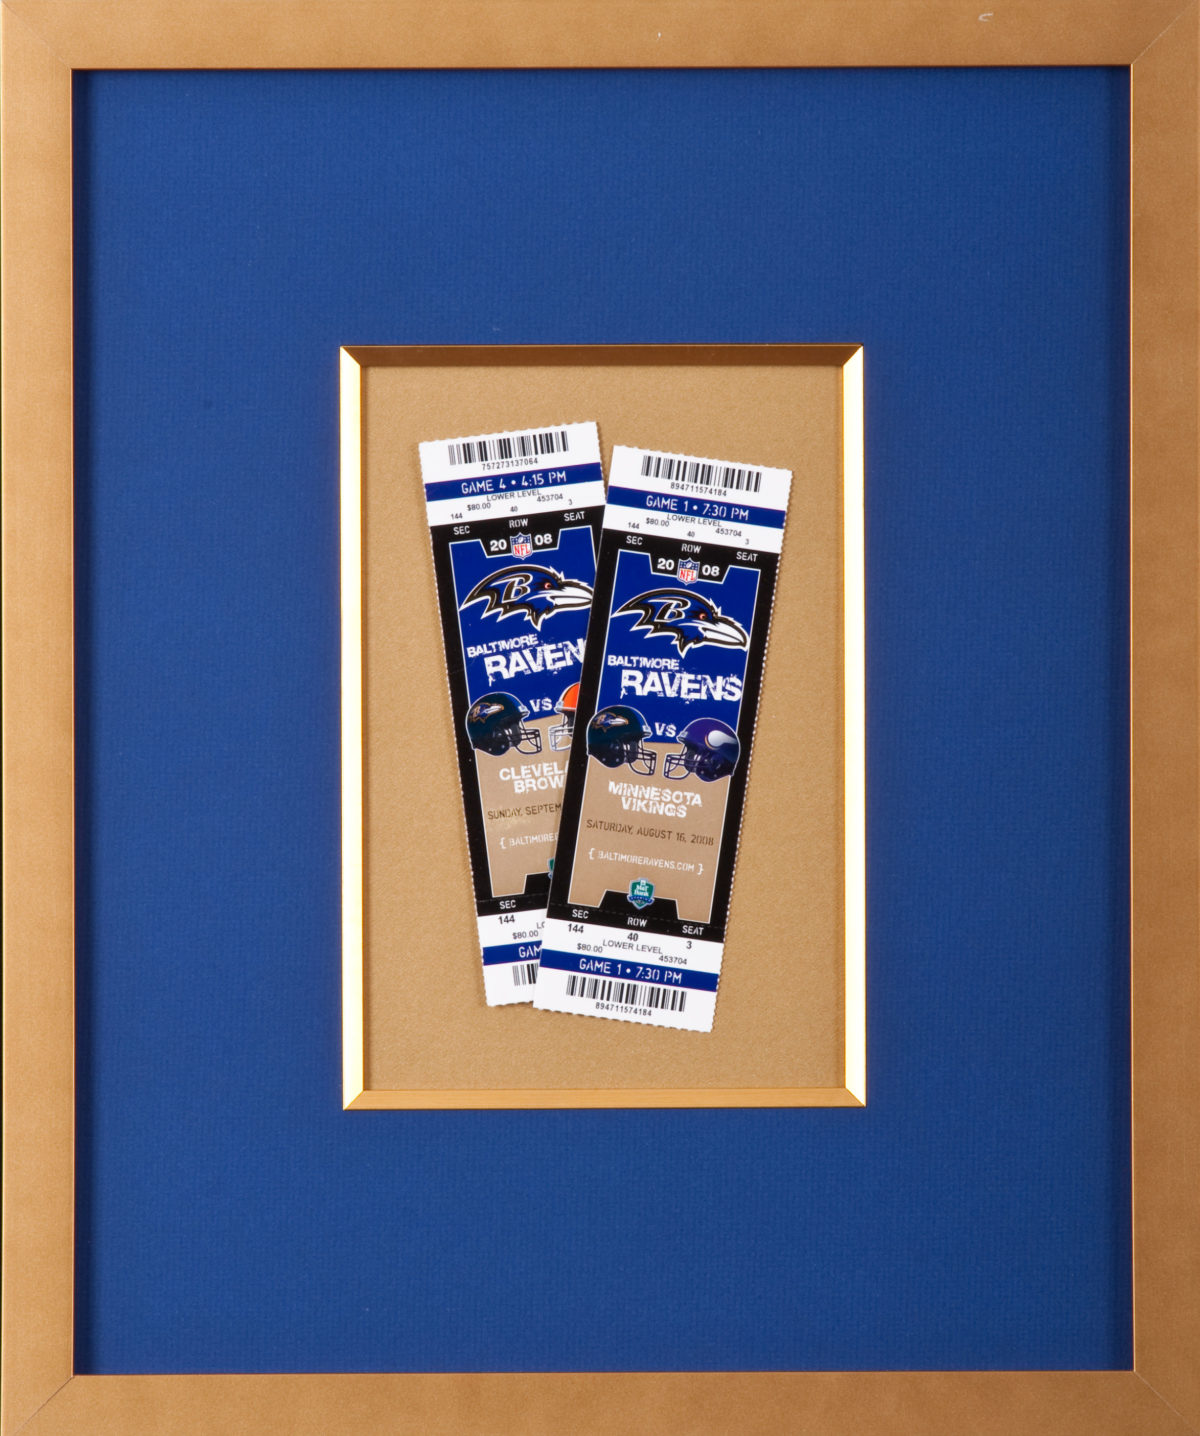 How to Display Football Tickets